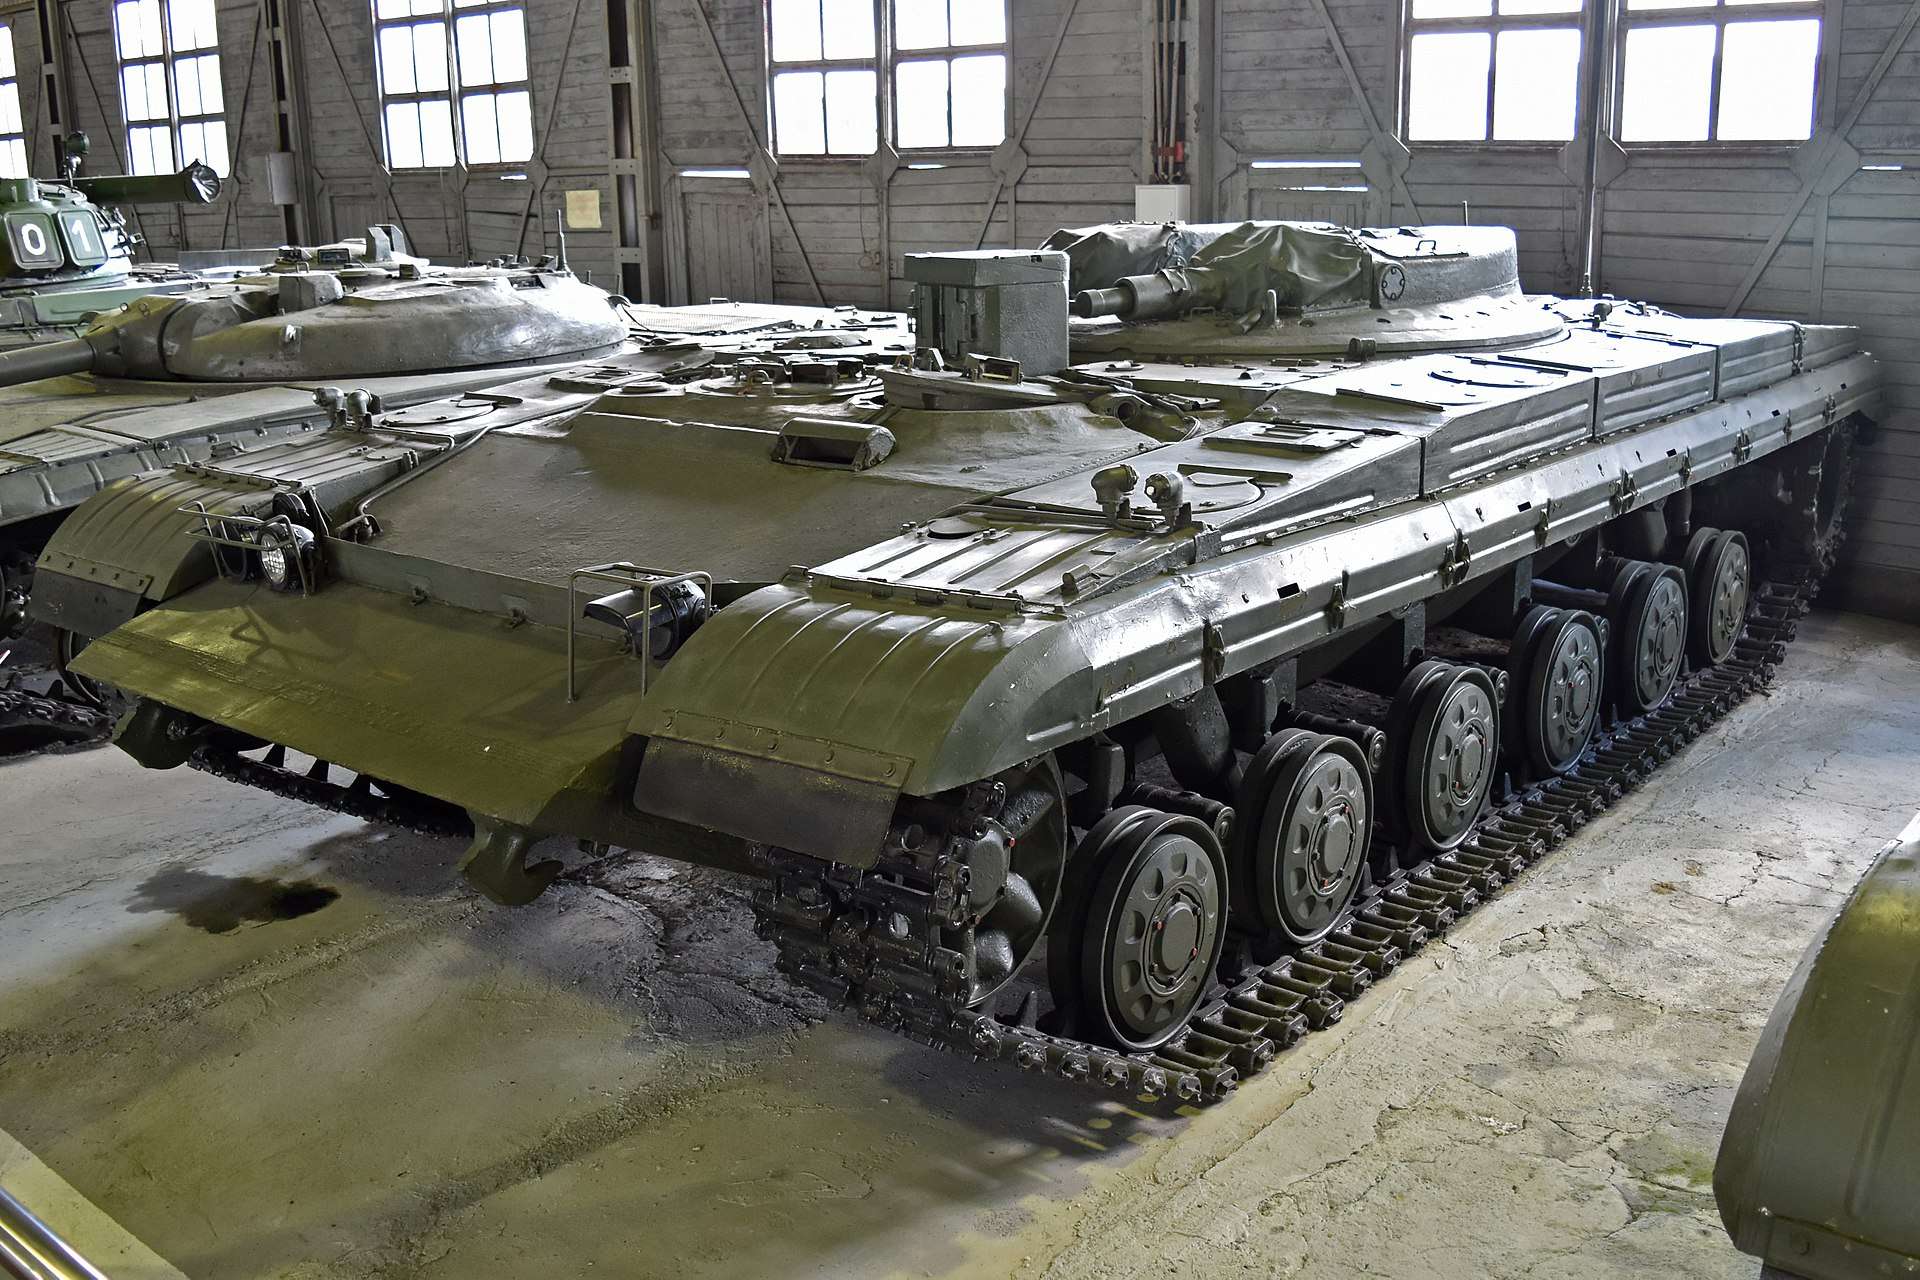 A preserved Object 287.